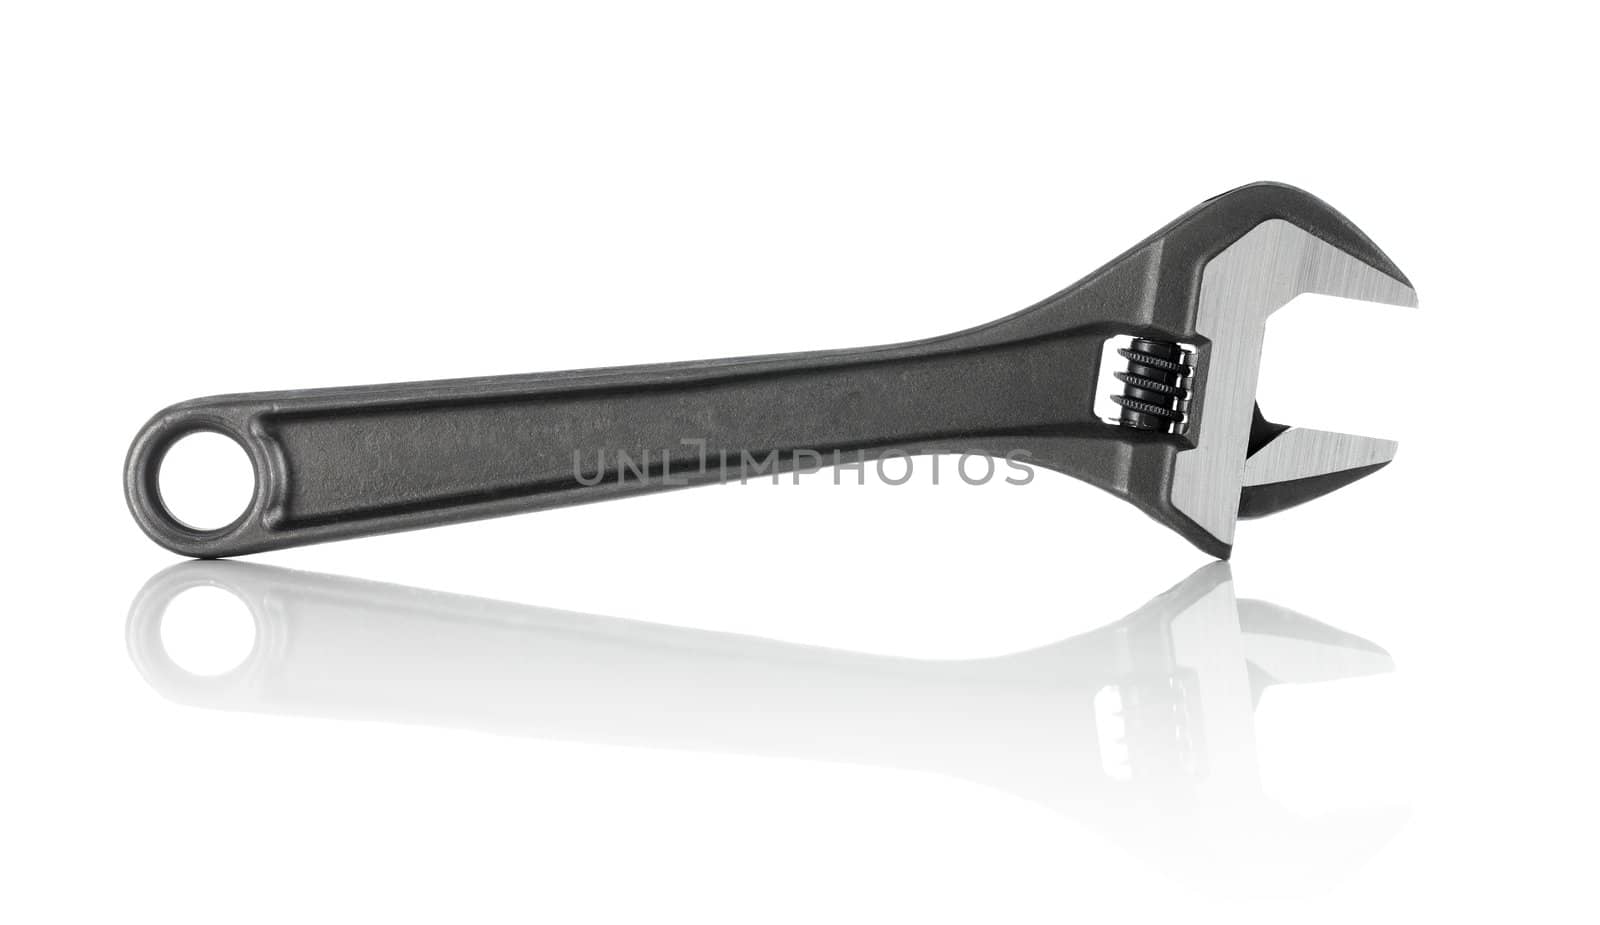 A new adjustable spanner isolated on white with reflection.